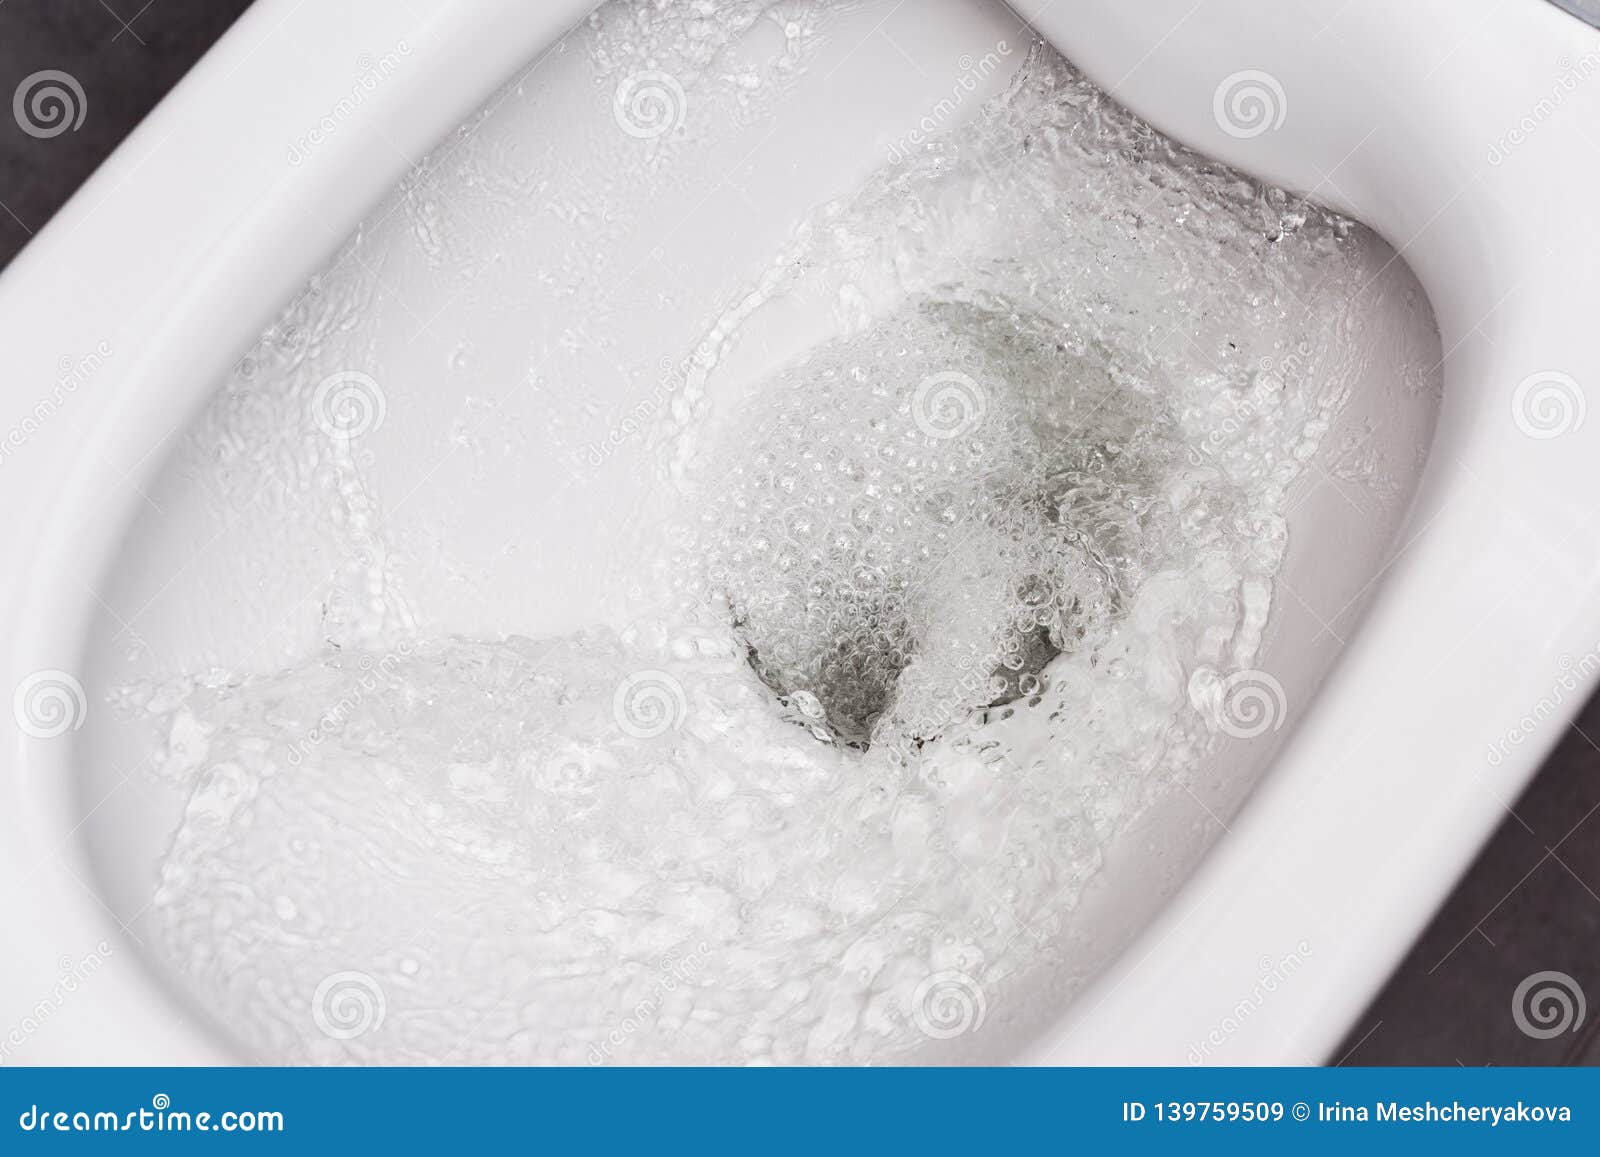 flush toilet. water flushes the toilet. the flow of water is clearly visible